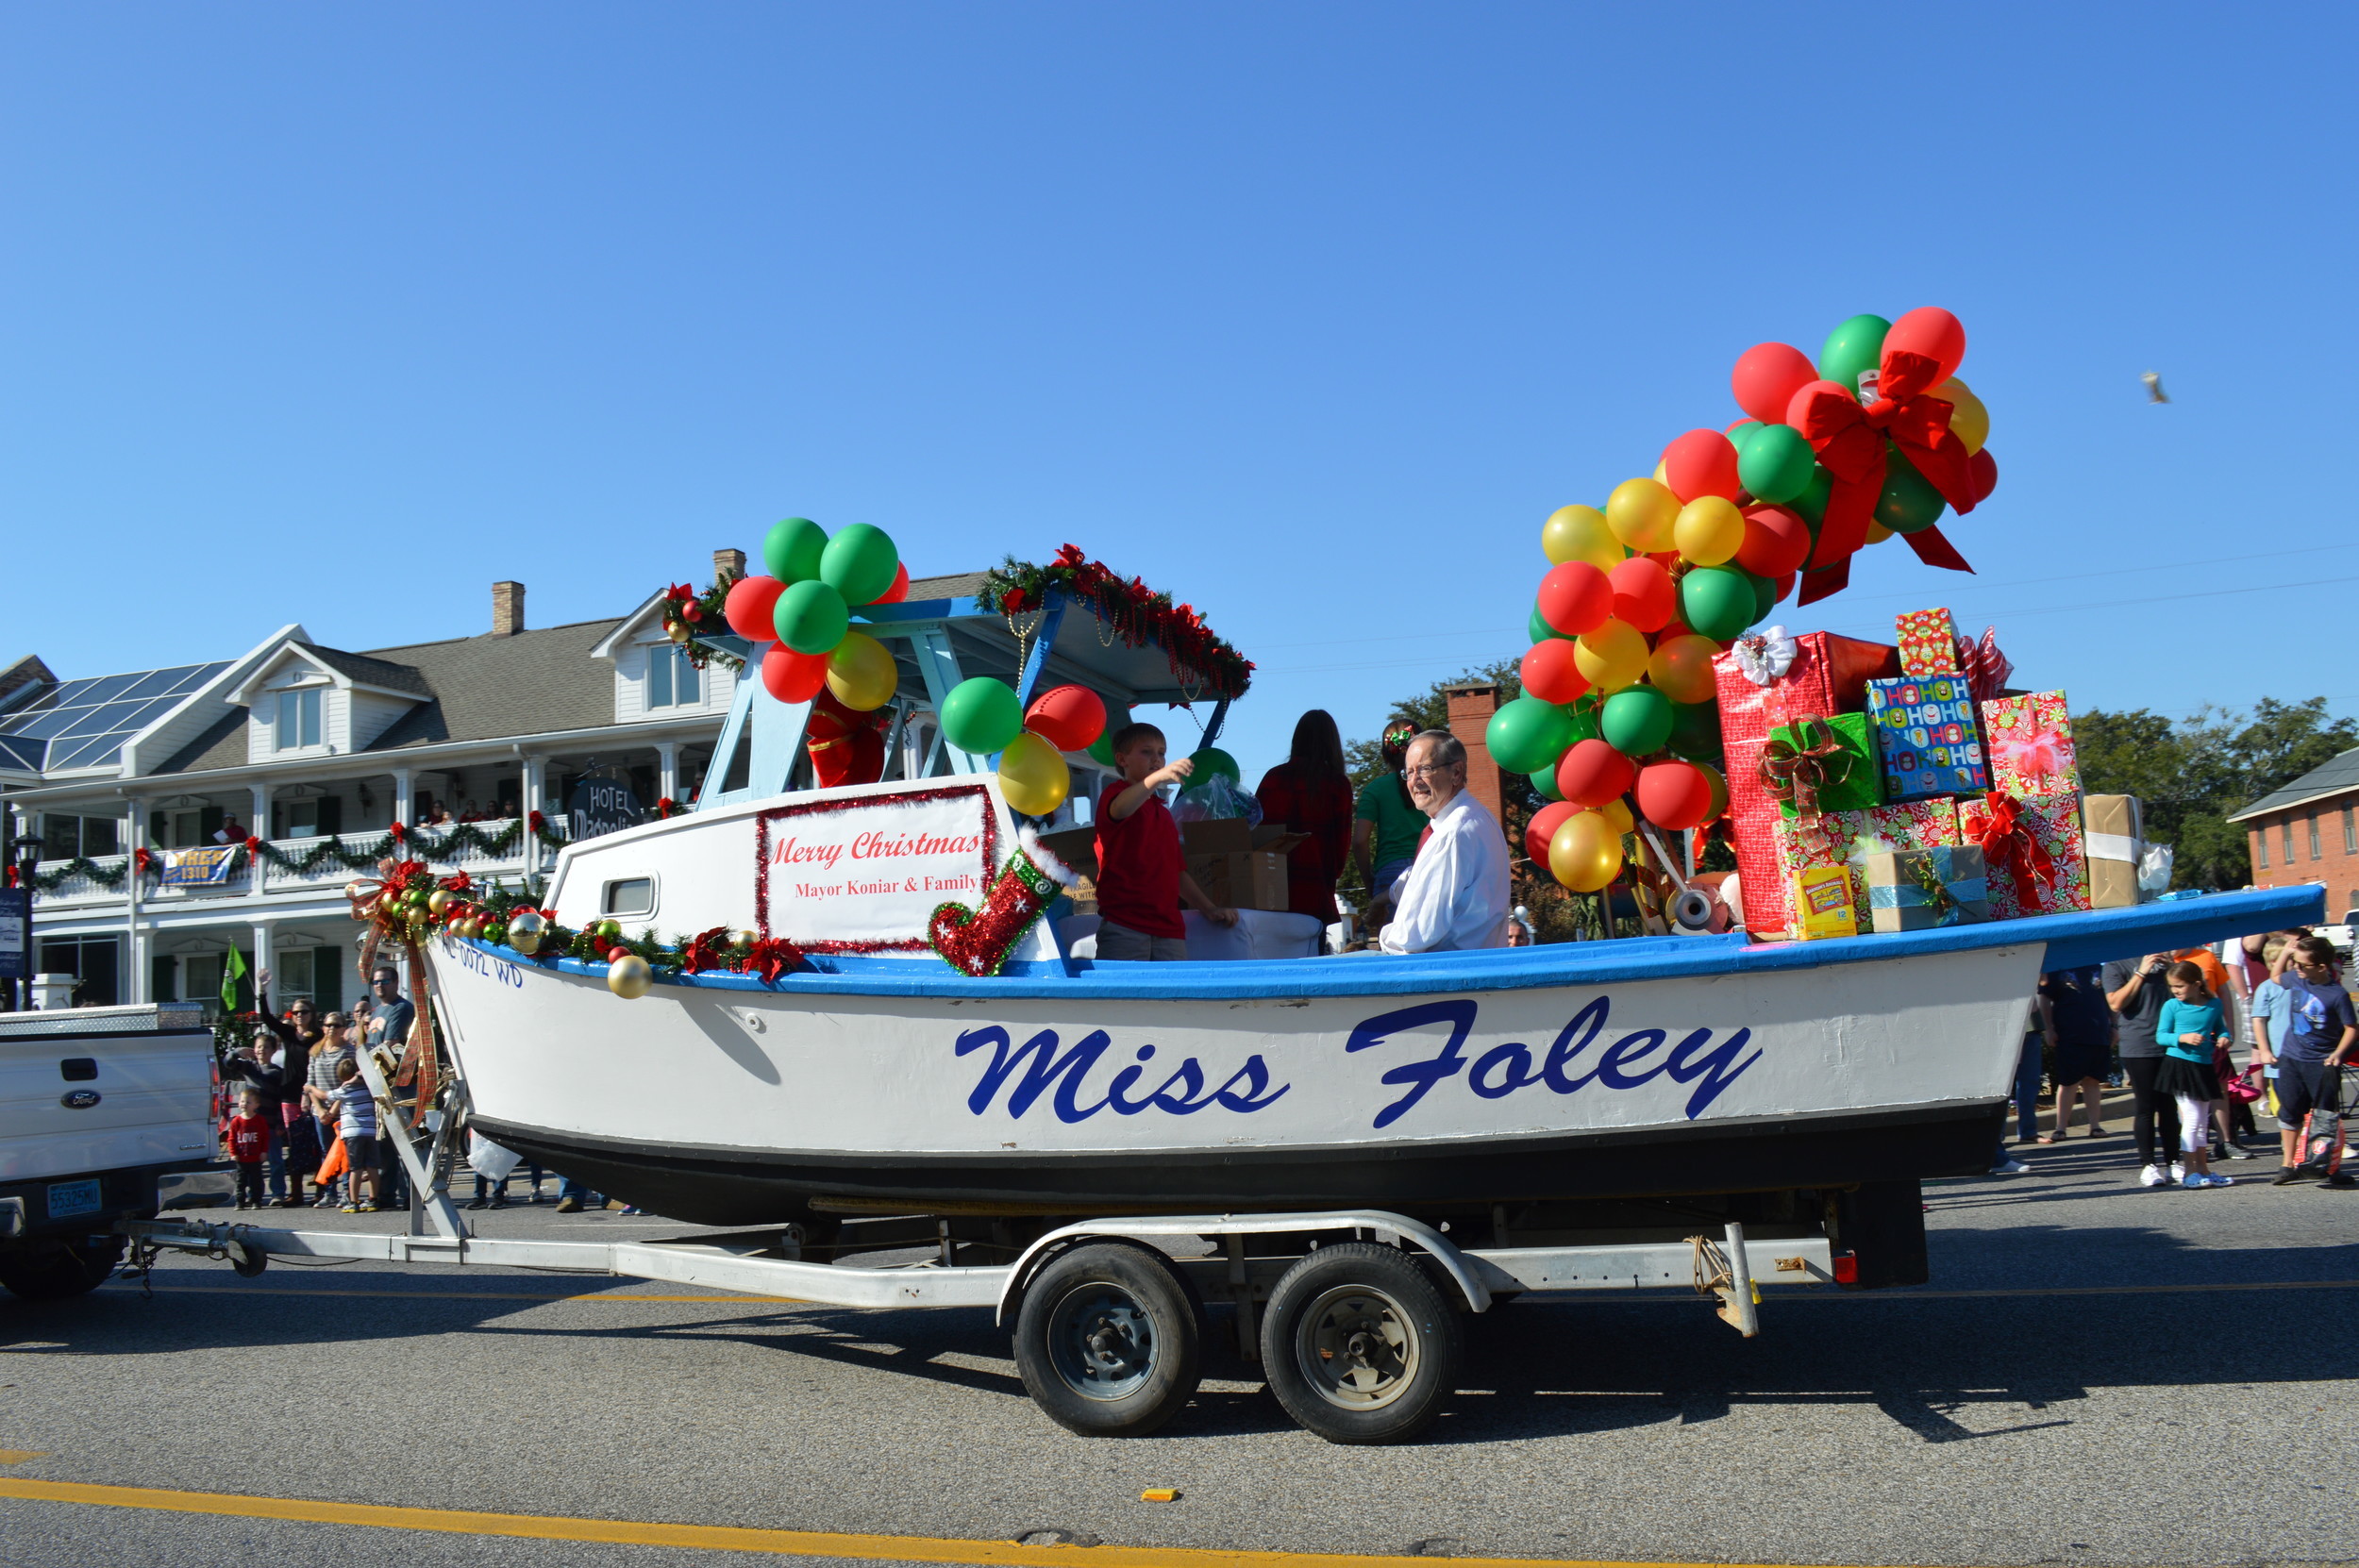 Want to participate in the Foley Christmas Parade